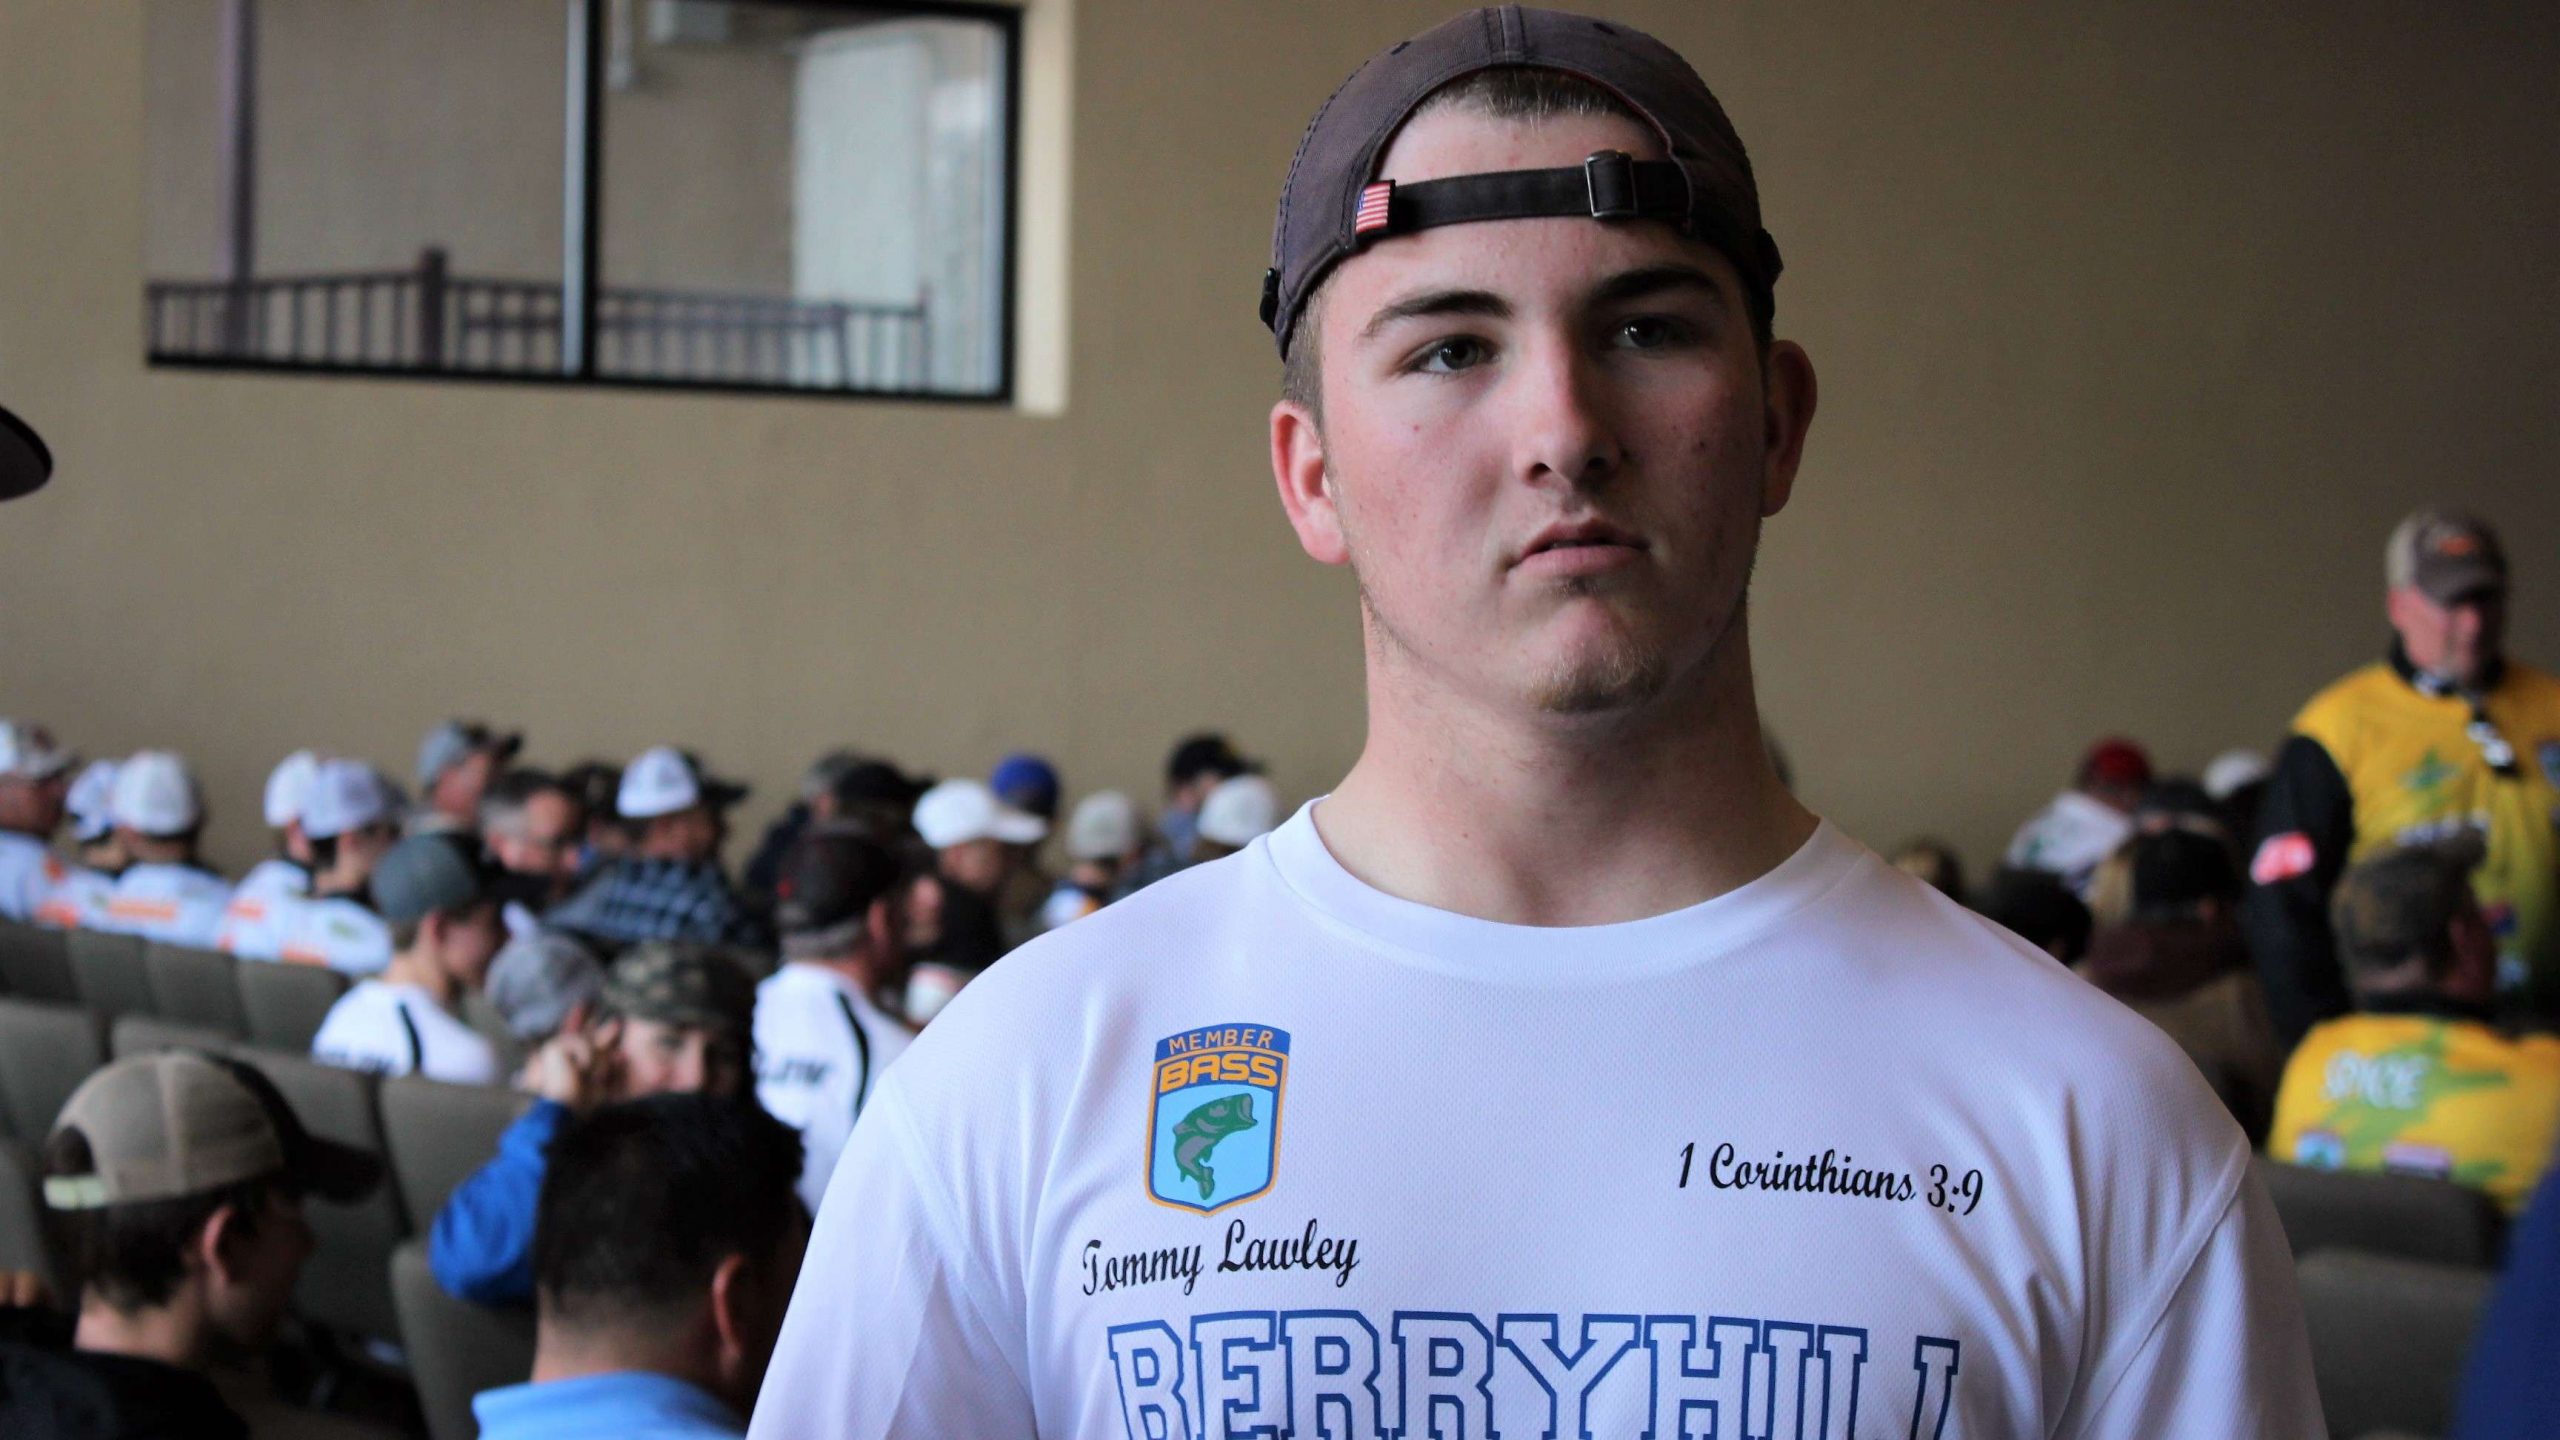 Tommy Lawley of Berryhill (Okla.) means business when he checks in on Saturday.